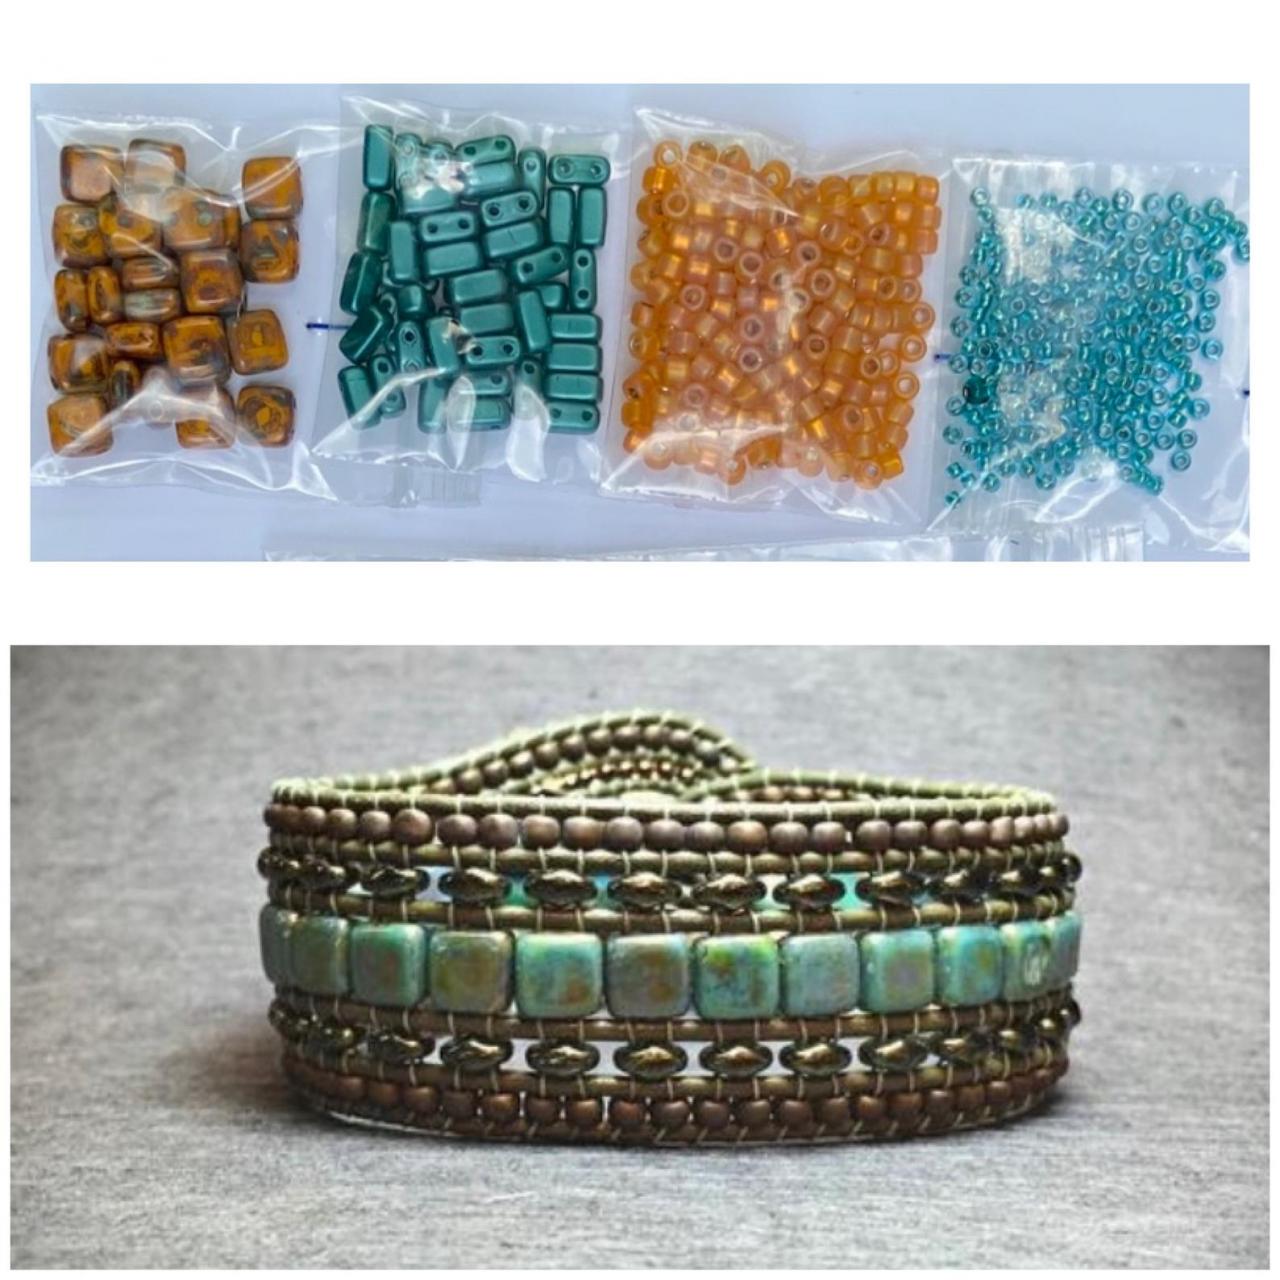 KIT Wide Leather Beaded Cuff Bonny Mustard Turquoise Picasso DIY Intermediate Instructions Complete NO Tools #17